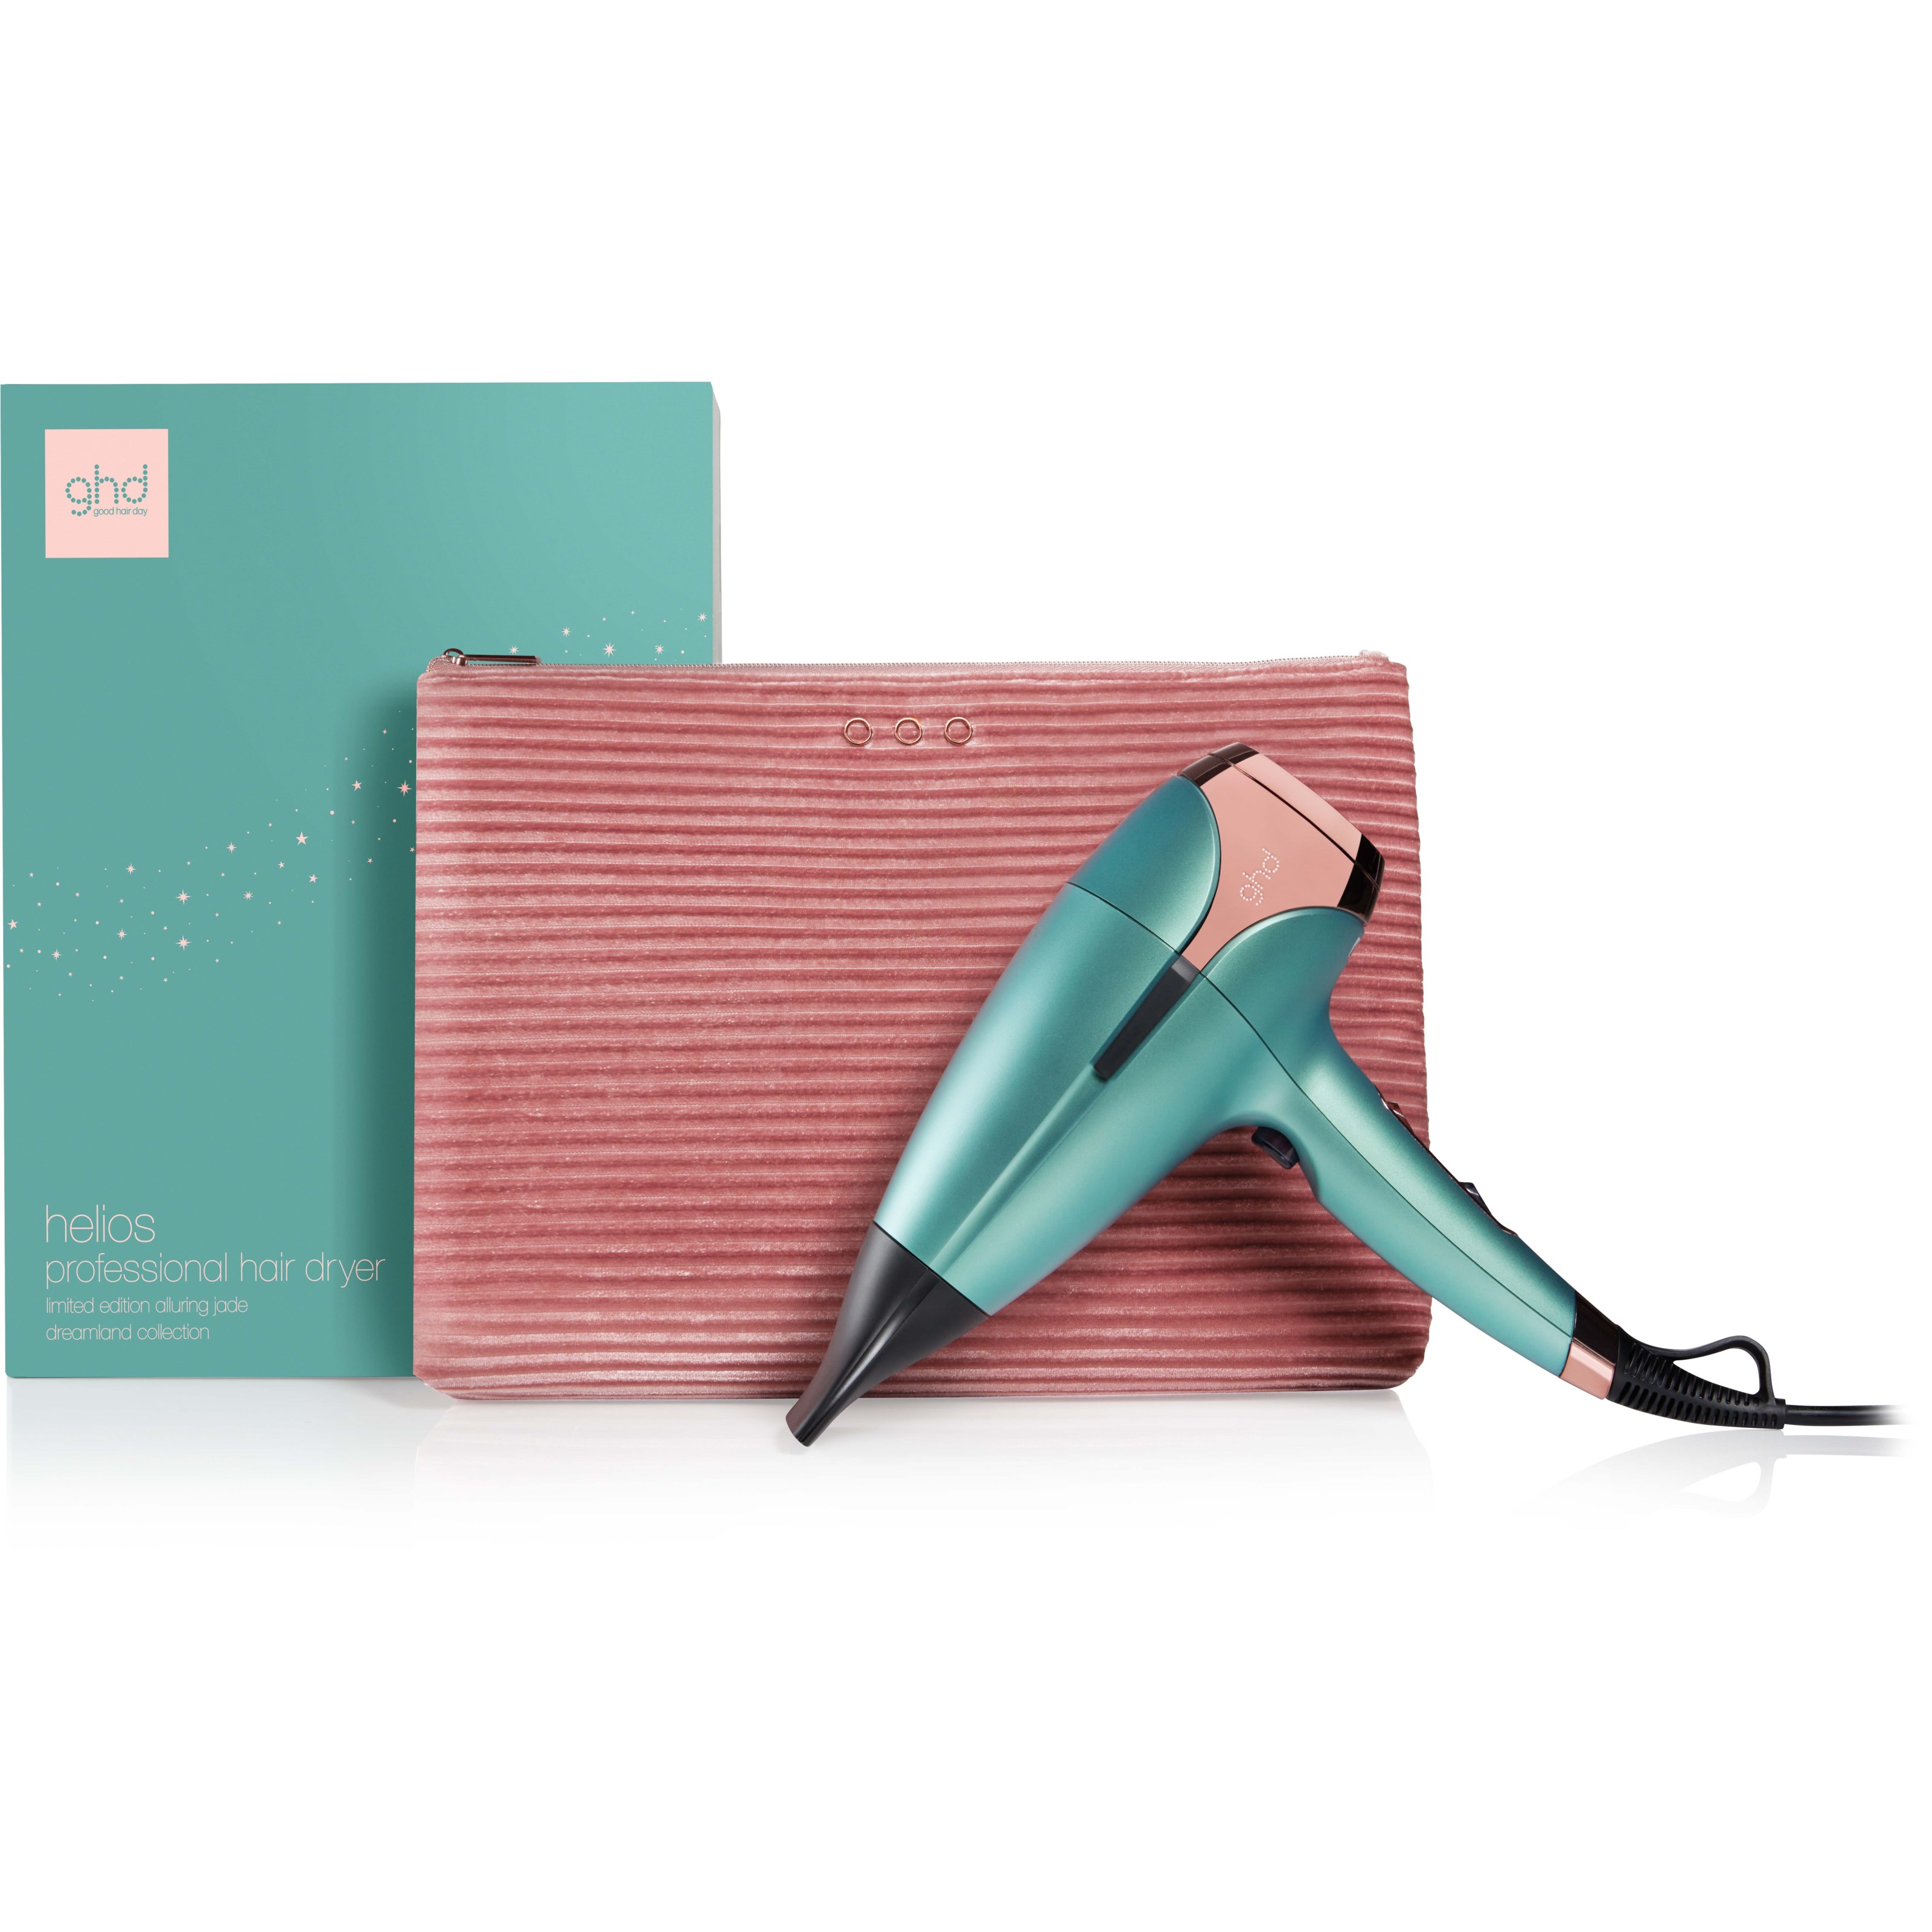 Läs mer om ghd Helios™ Dreamland Holiday Collection Limited Edition Gift Set